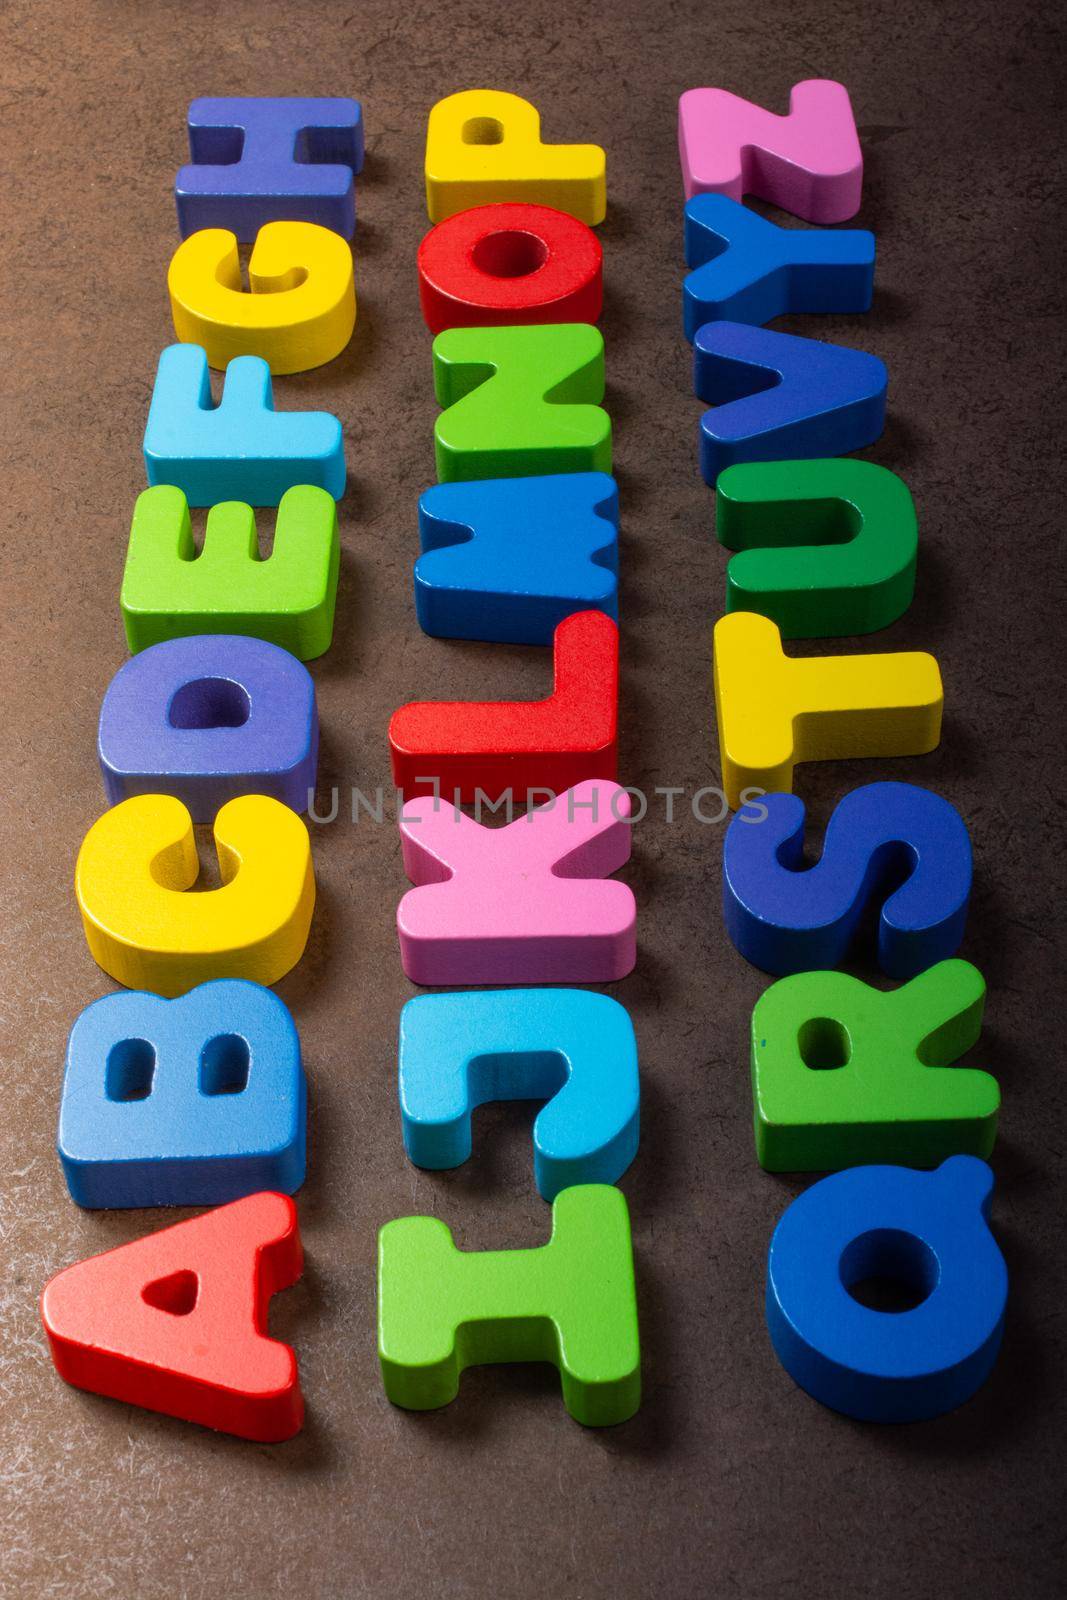 A, B and C wooden alphabet letters for learning concept by berkay